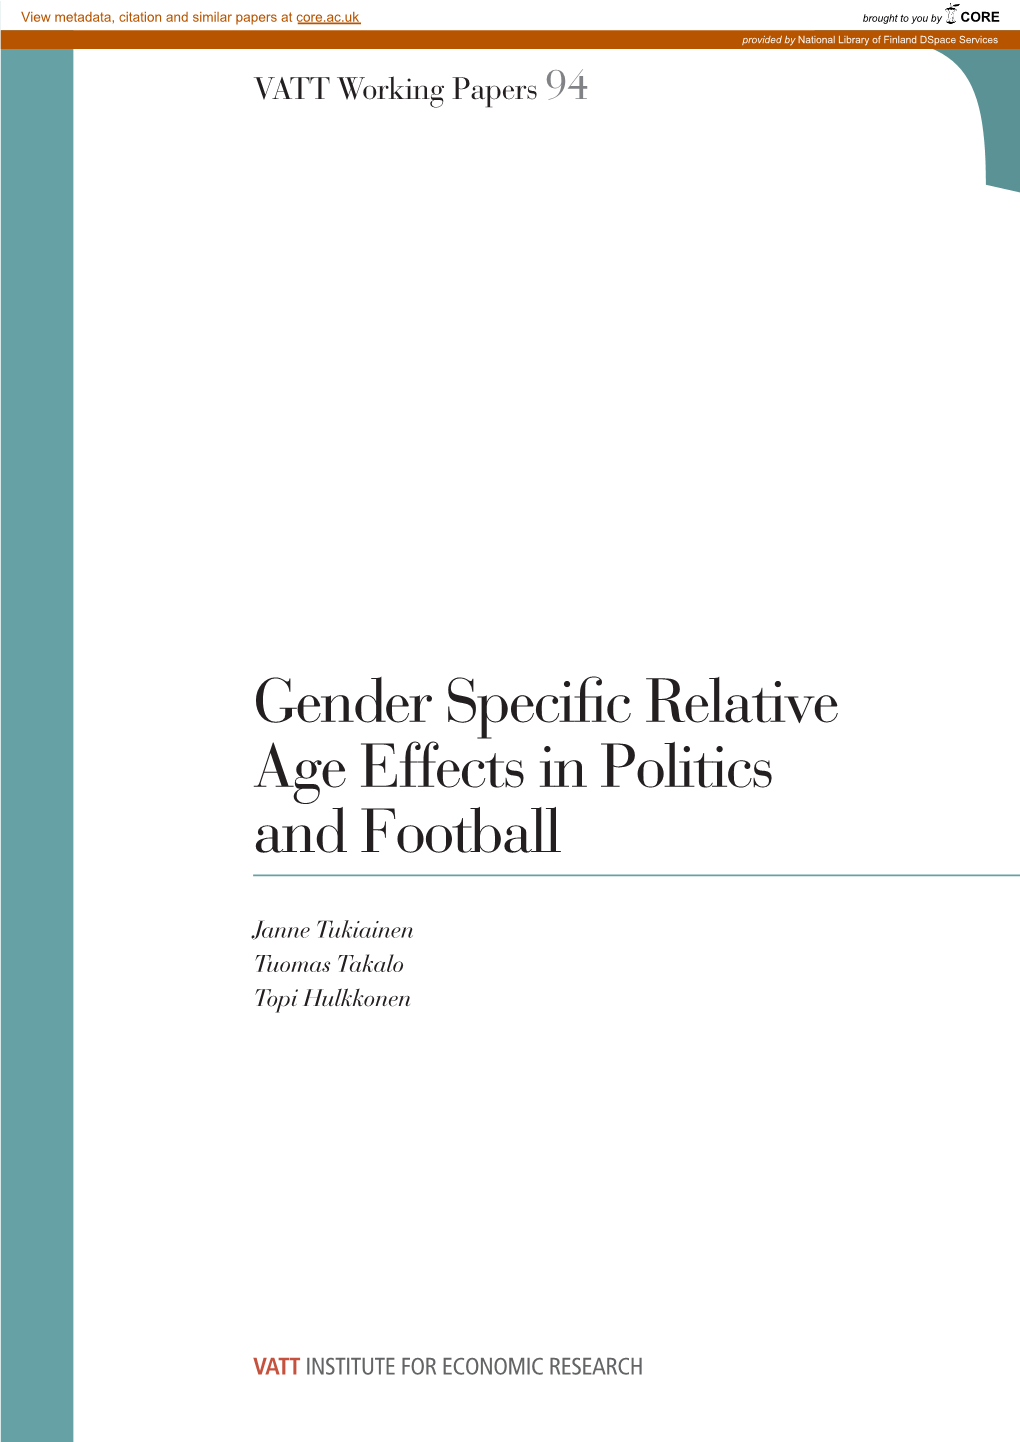 Gender Specific Relative Age Effects in Politics and Football